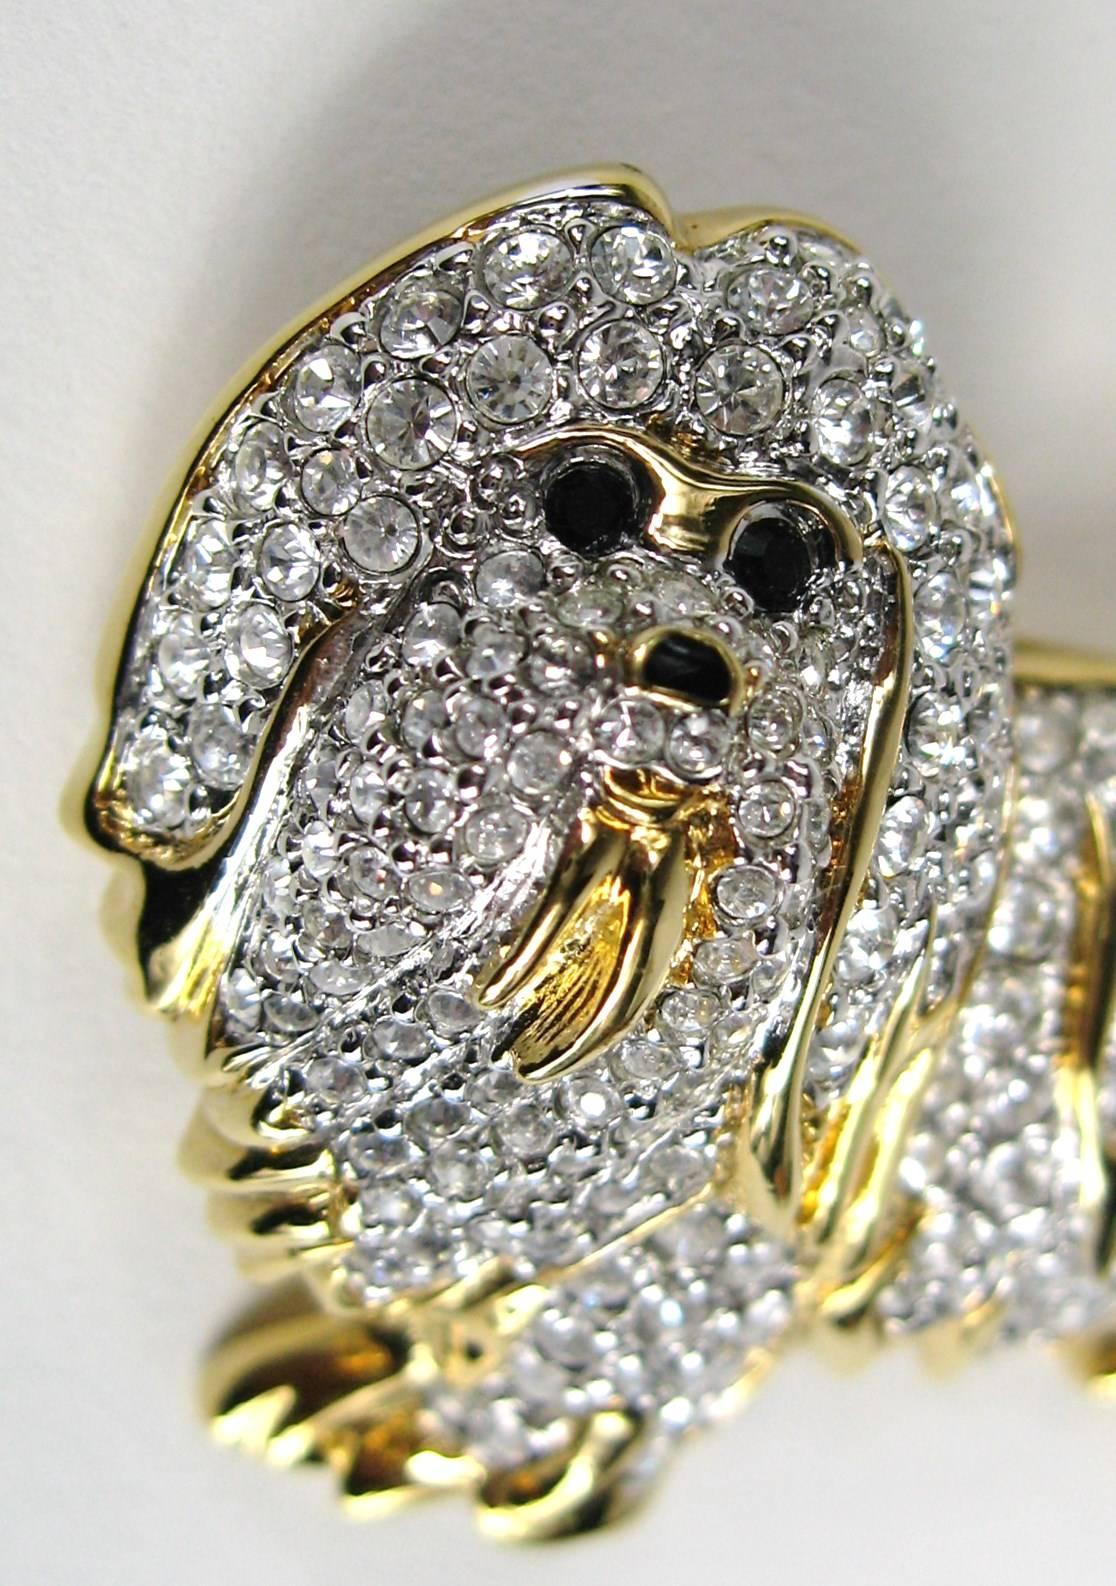 Just sweet, this Maltese Dog Brooch designed by Swarovski 
1999 Swarovski Trunk Tour Show and is one of 46 of the pins where Swarovski introduced the best of the best that Swarovski ever made.
 full clear colored pave' crystal with a jet nose and